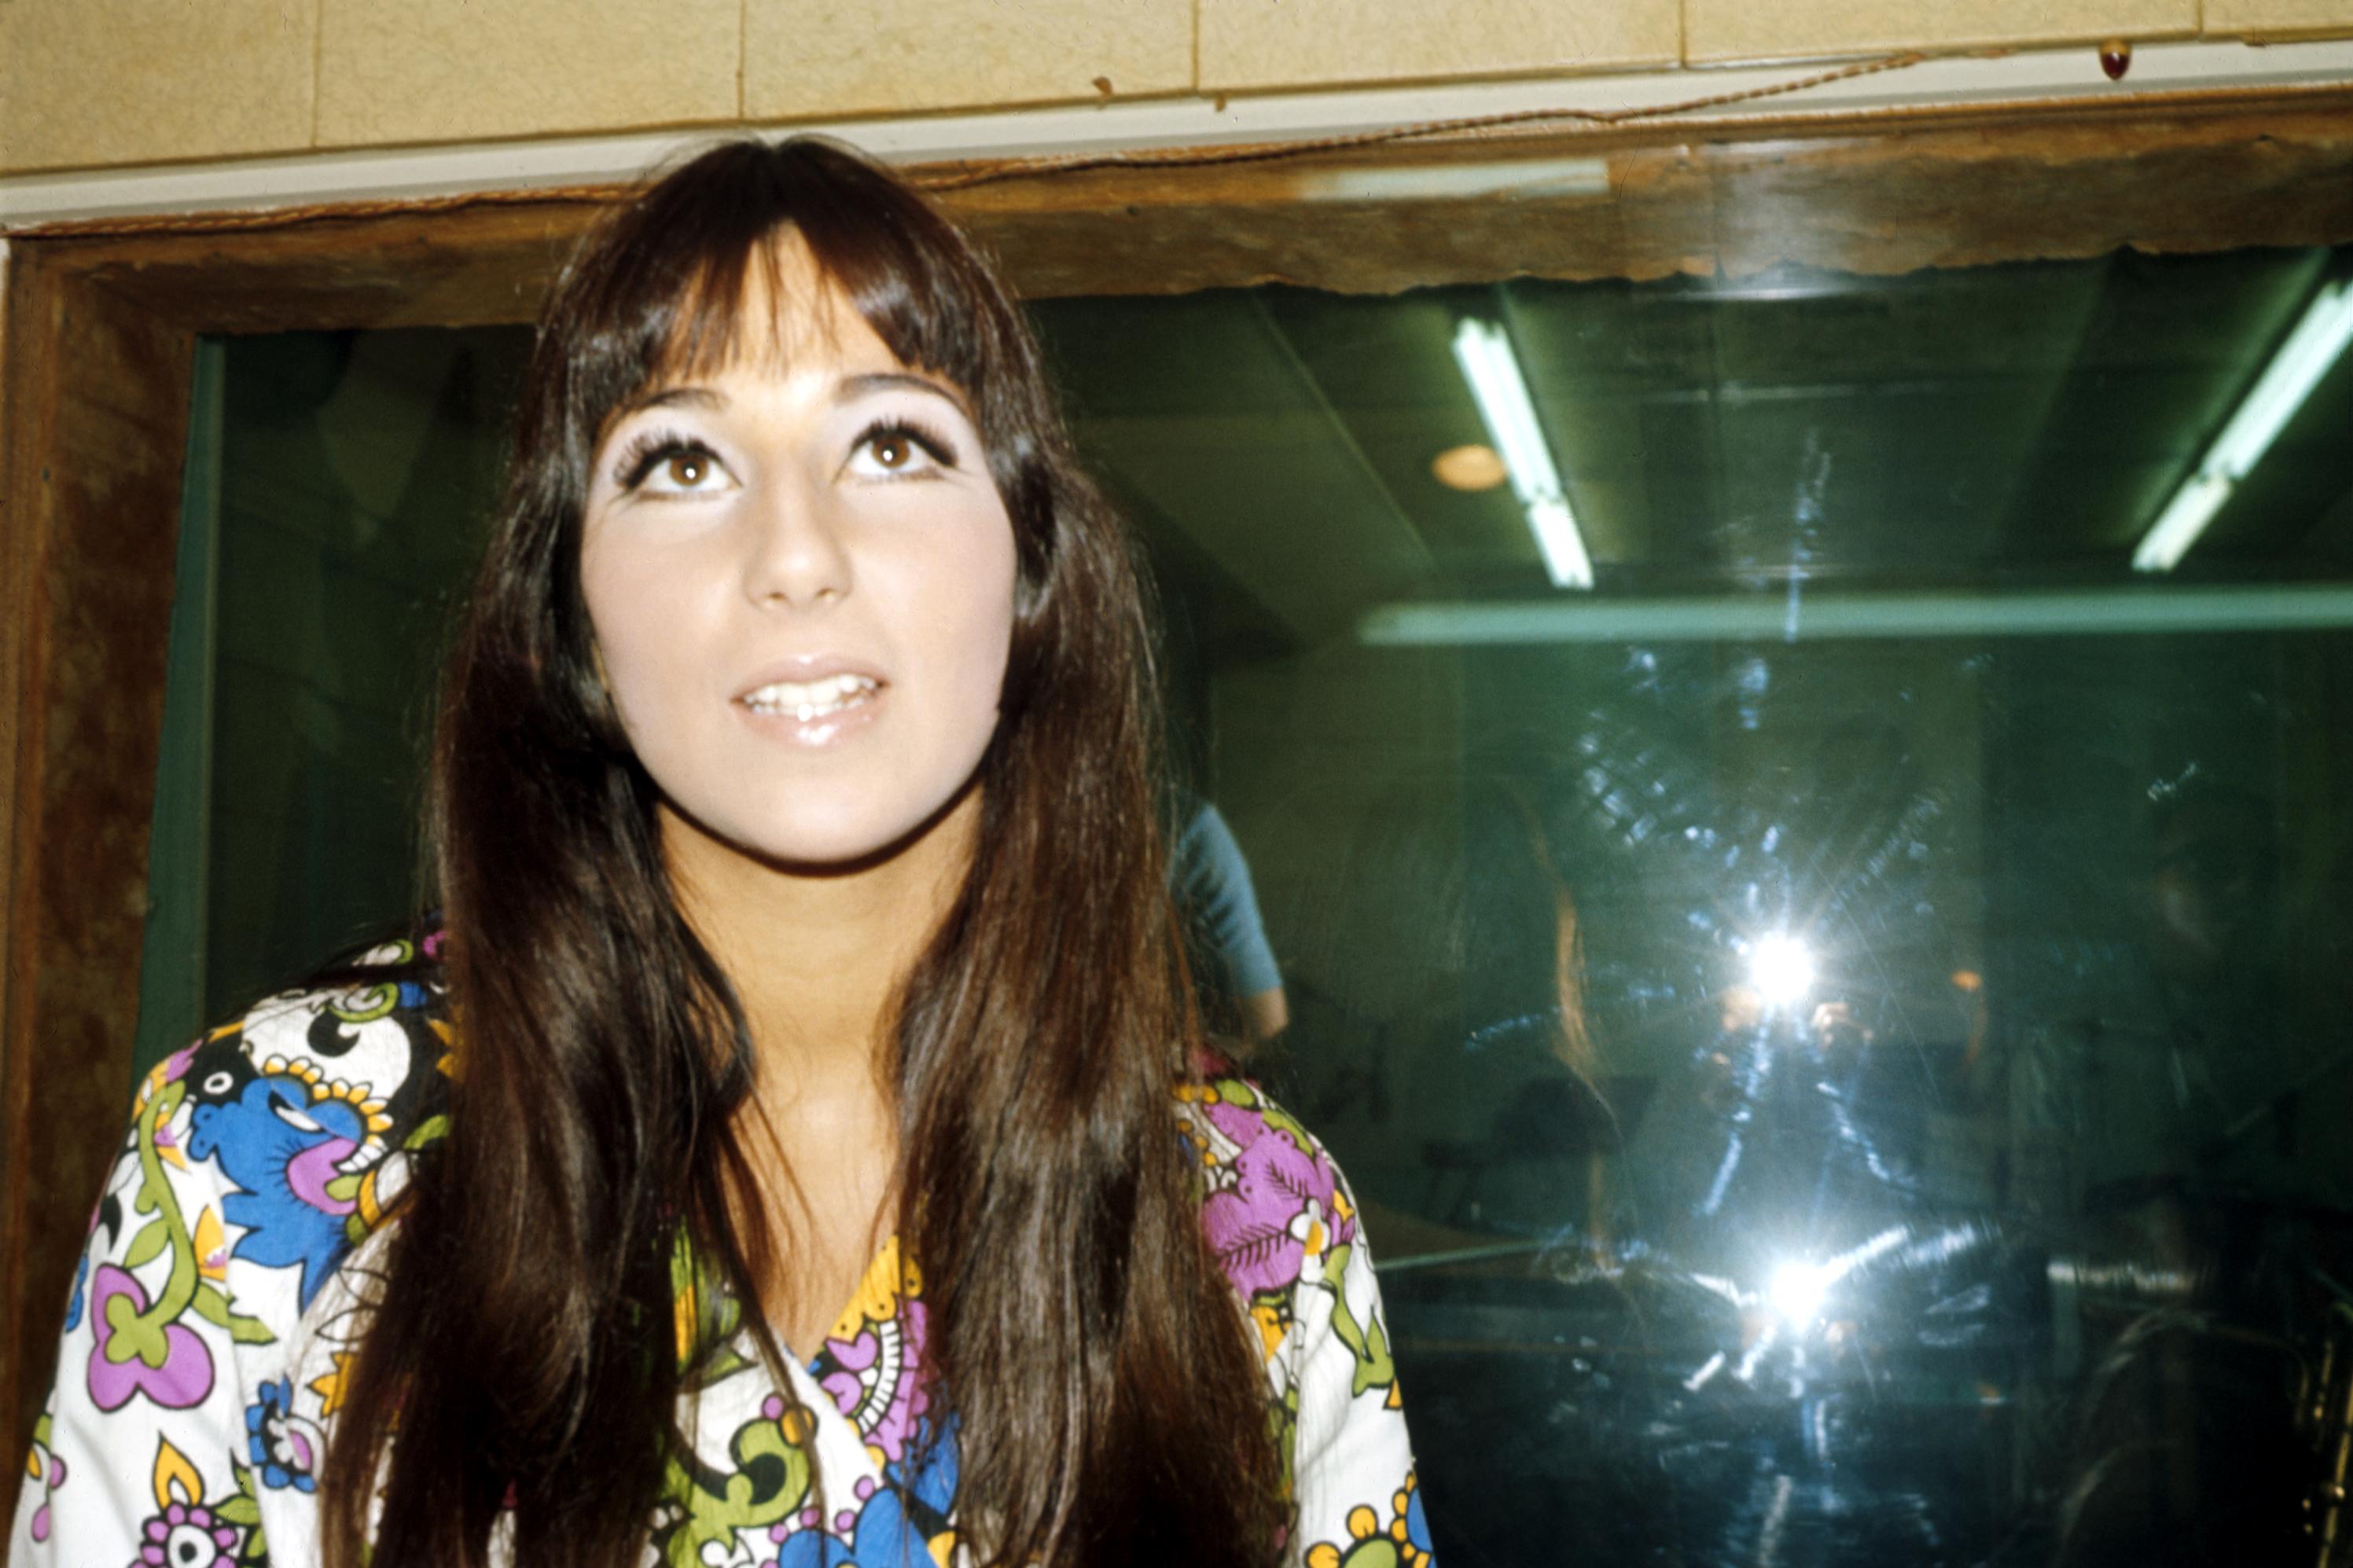 Cher poses during a recording session in April 1966 in Los Angeles, California | Source: Getty Images